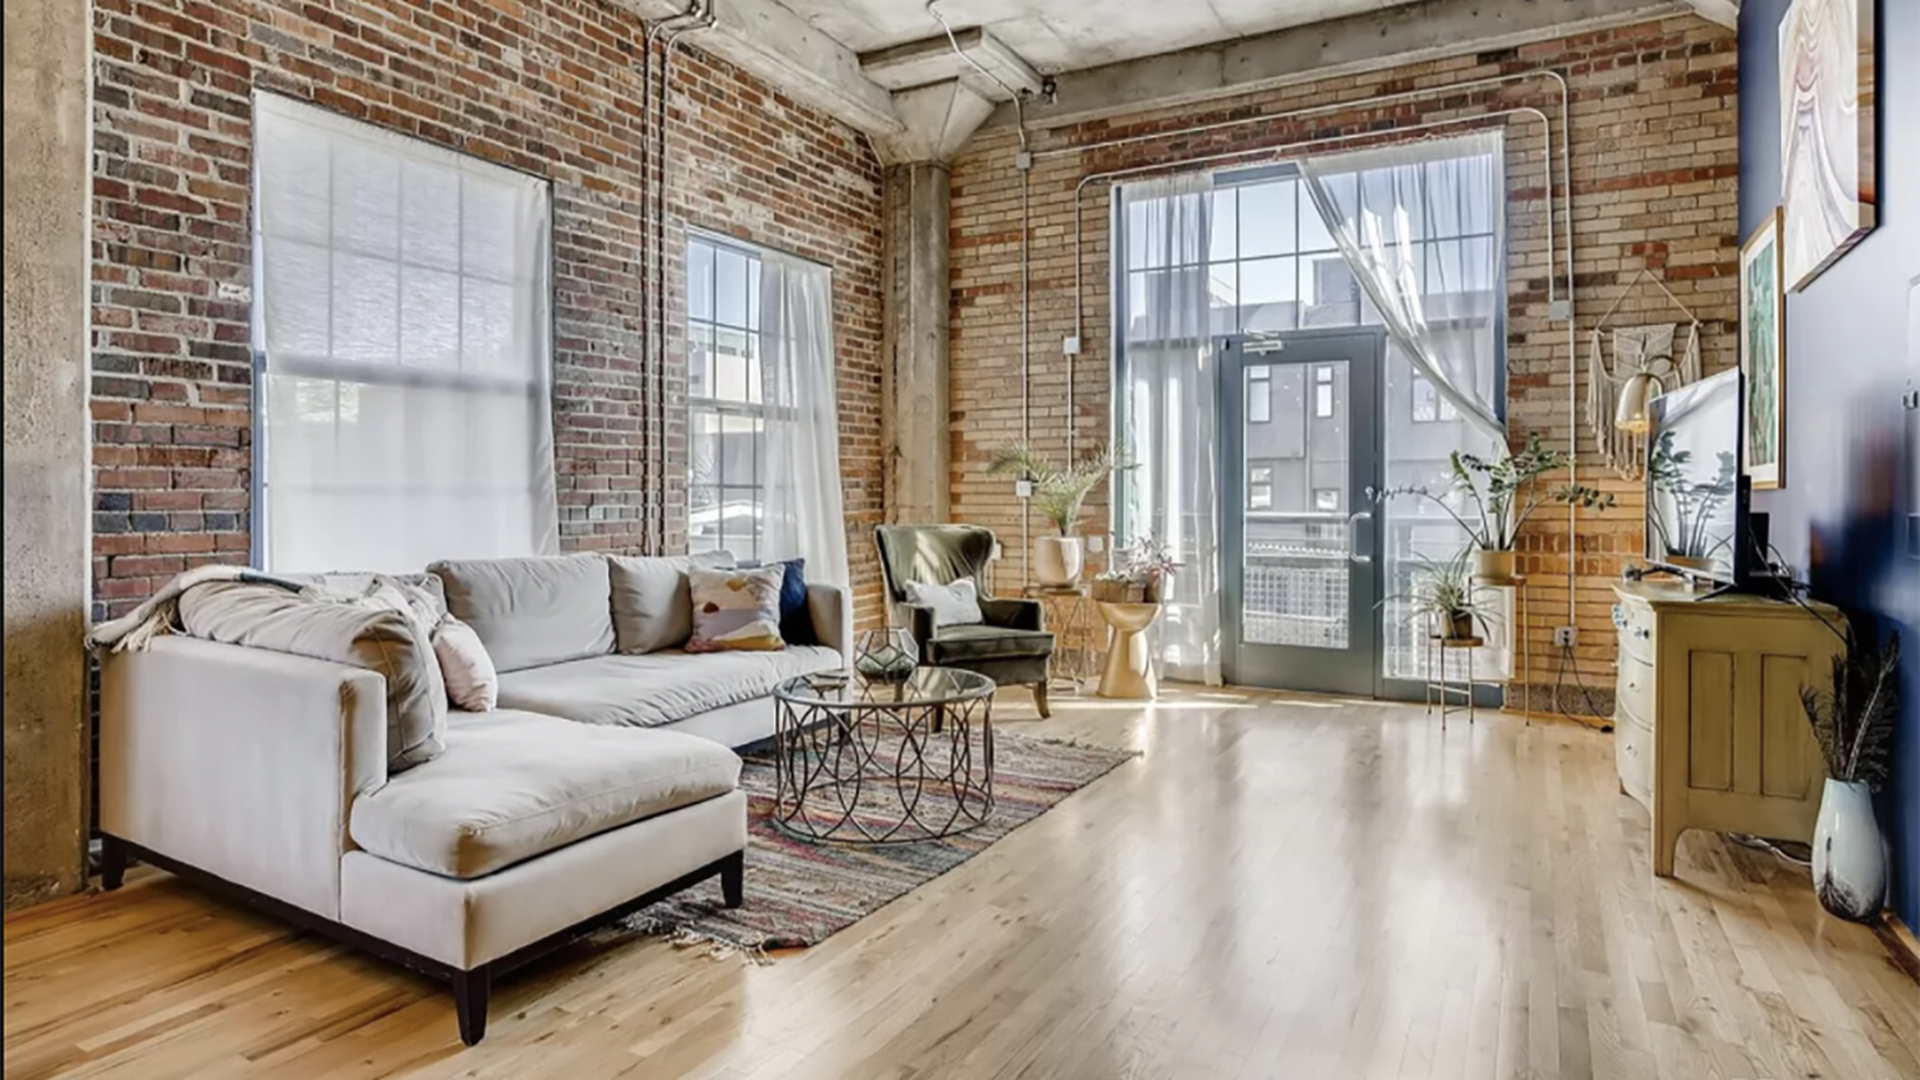 The inside of a condo in the iconic Benjamin Moore building with 14-foot ceilings, exposed brick walls, open layout and a walkable location.